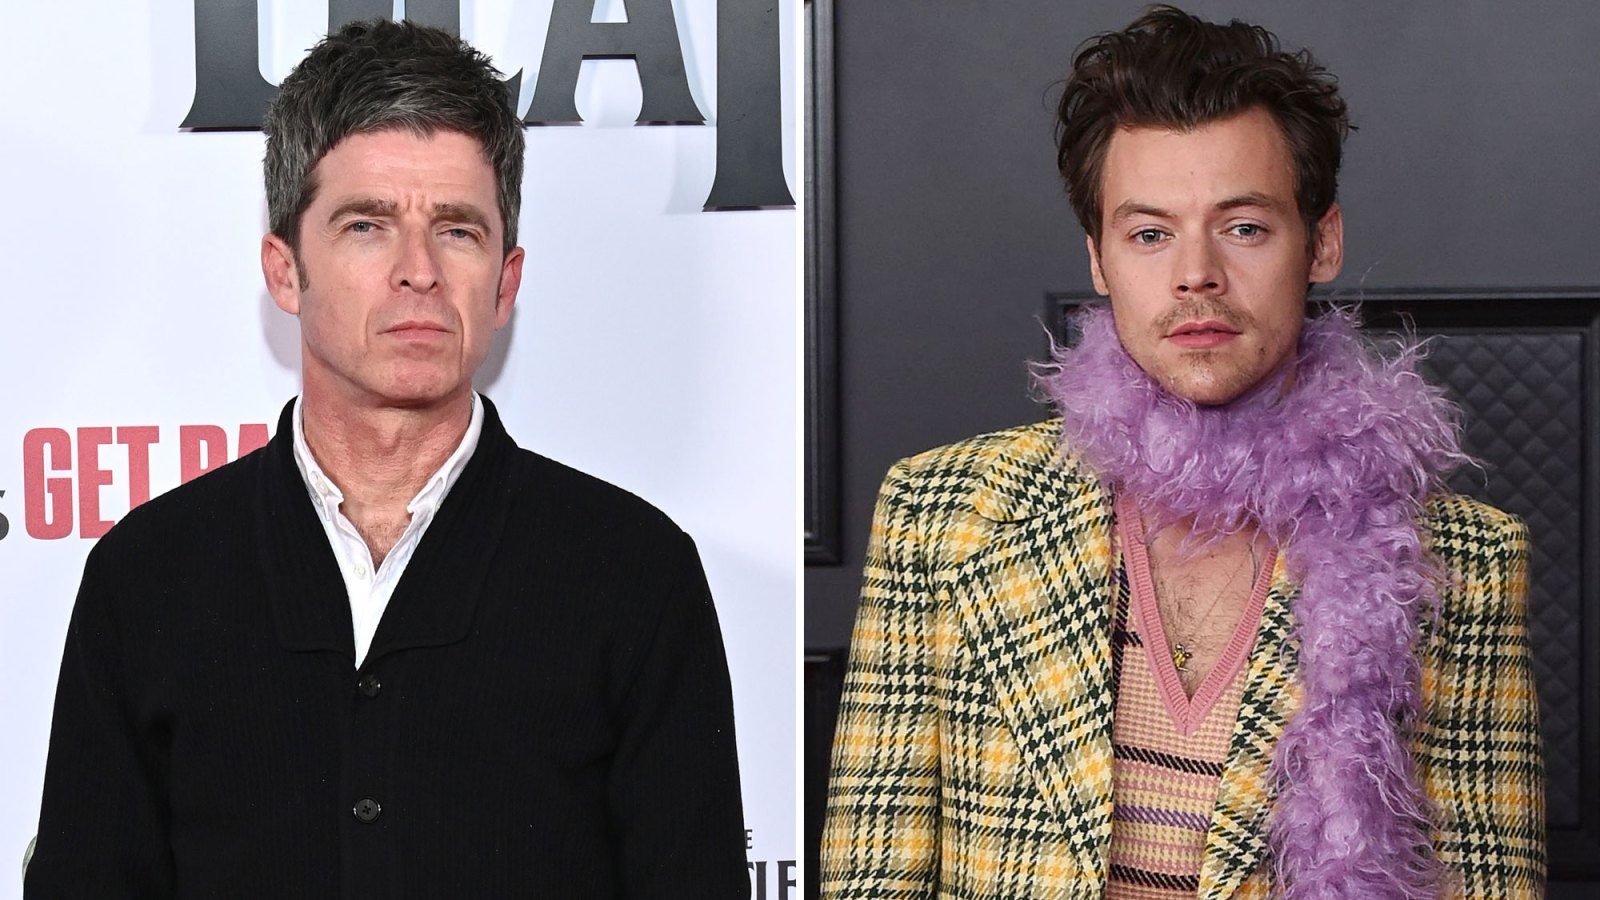 Noel Gallagher Says Harry Styles Isnt Real Musician